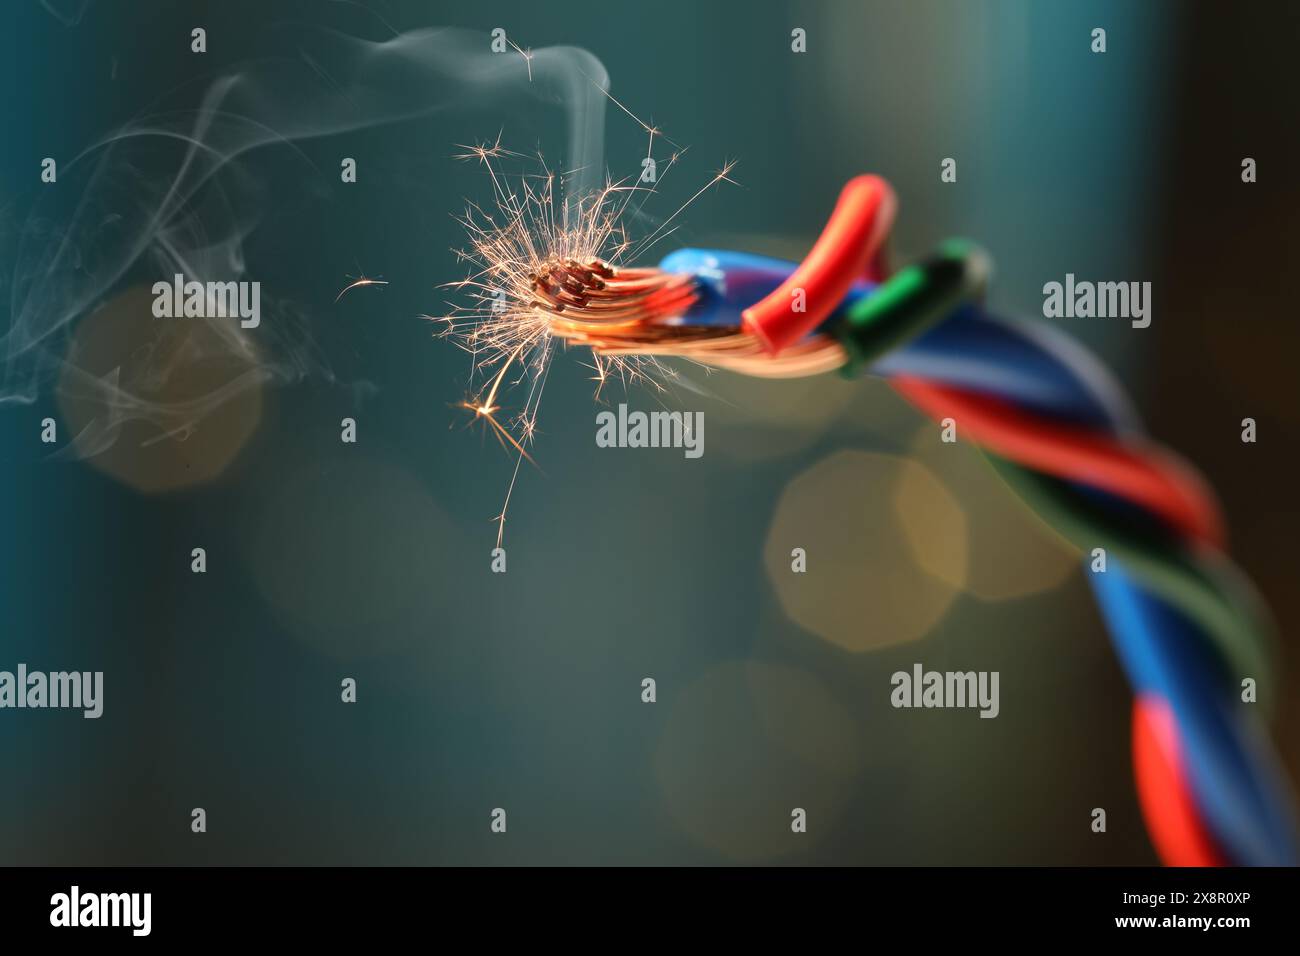 Sparking wiring on blurred background, closeup view Stock Photo